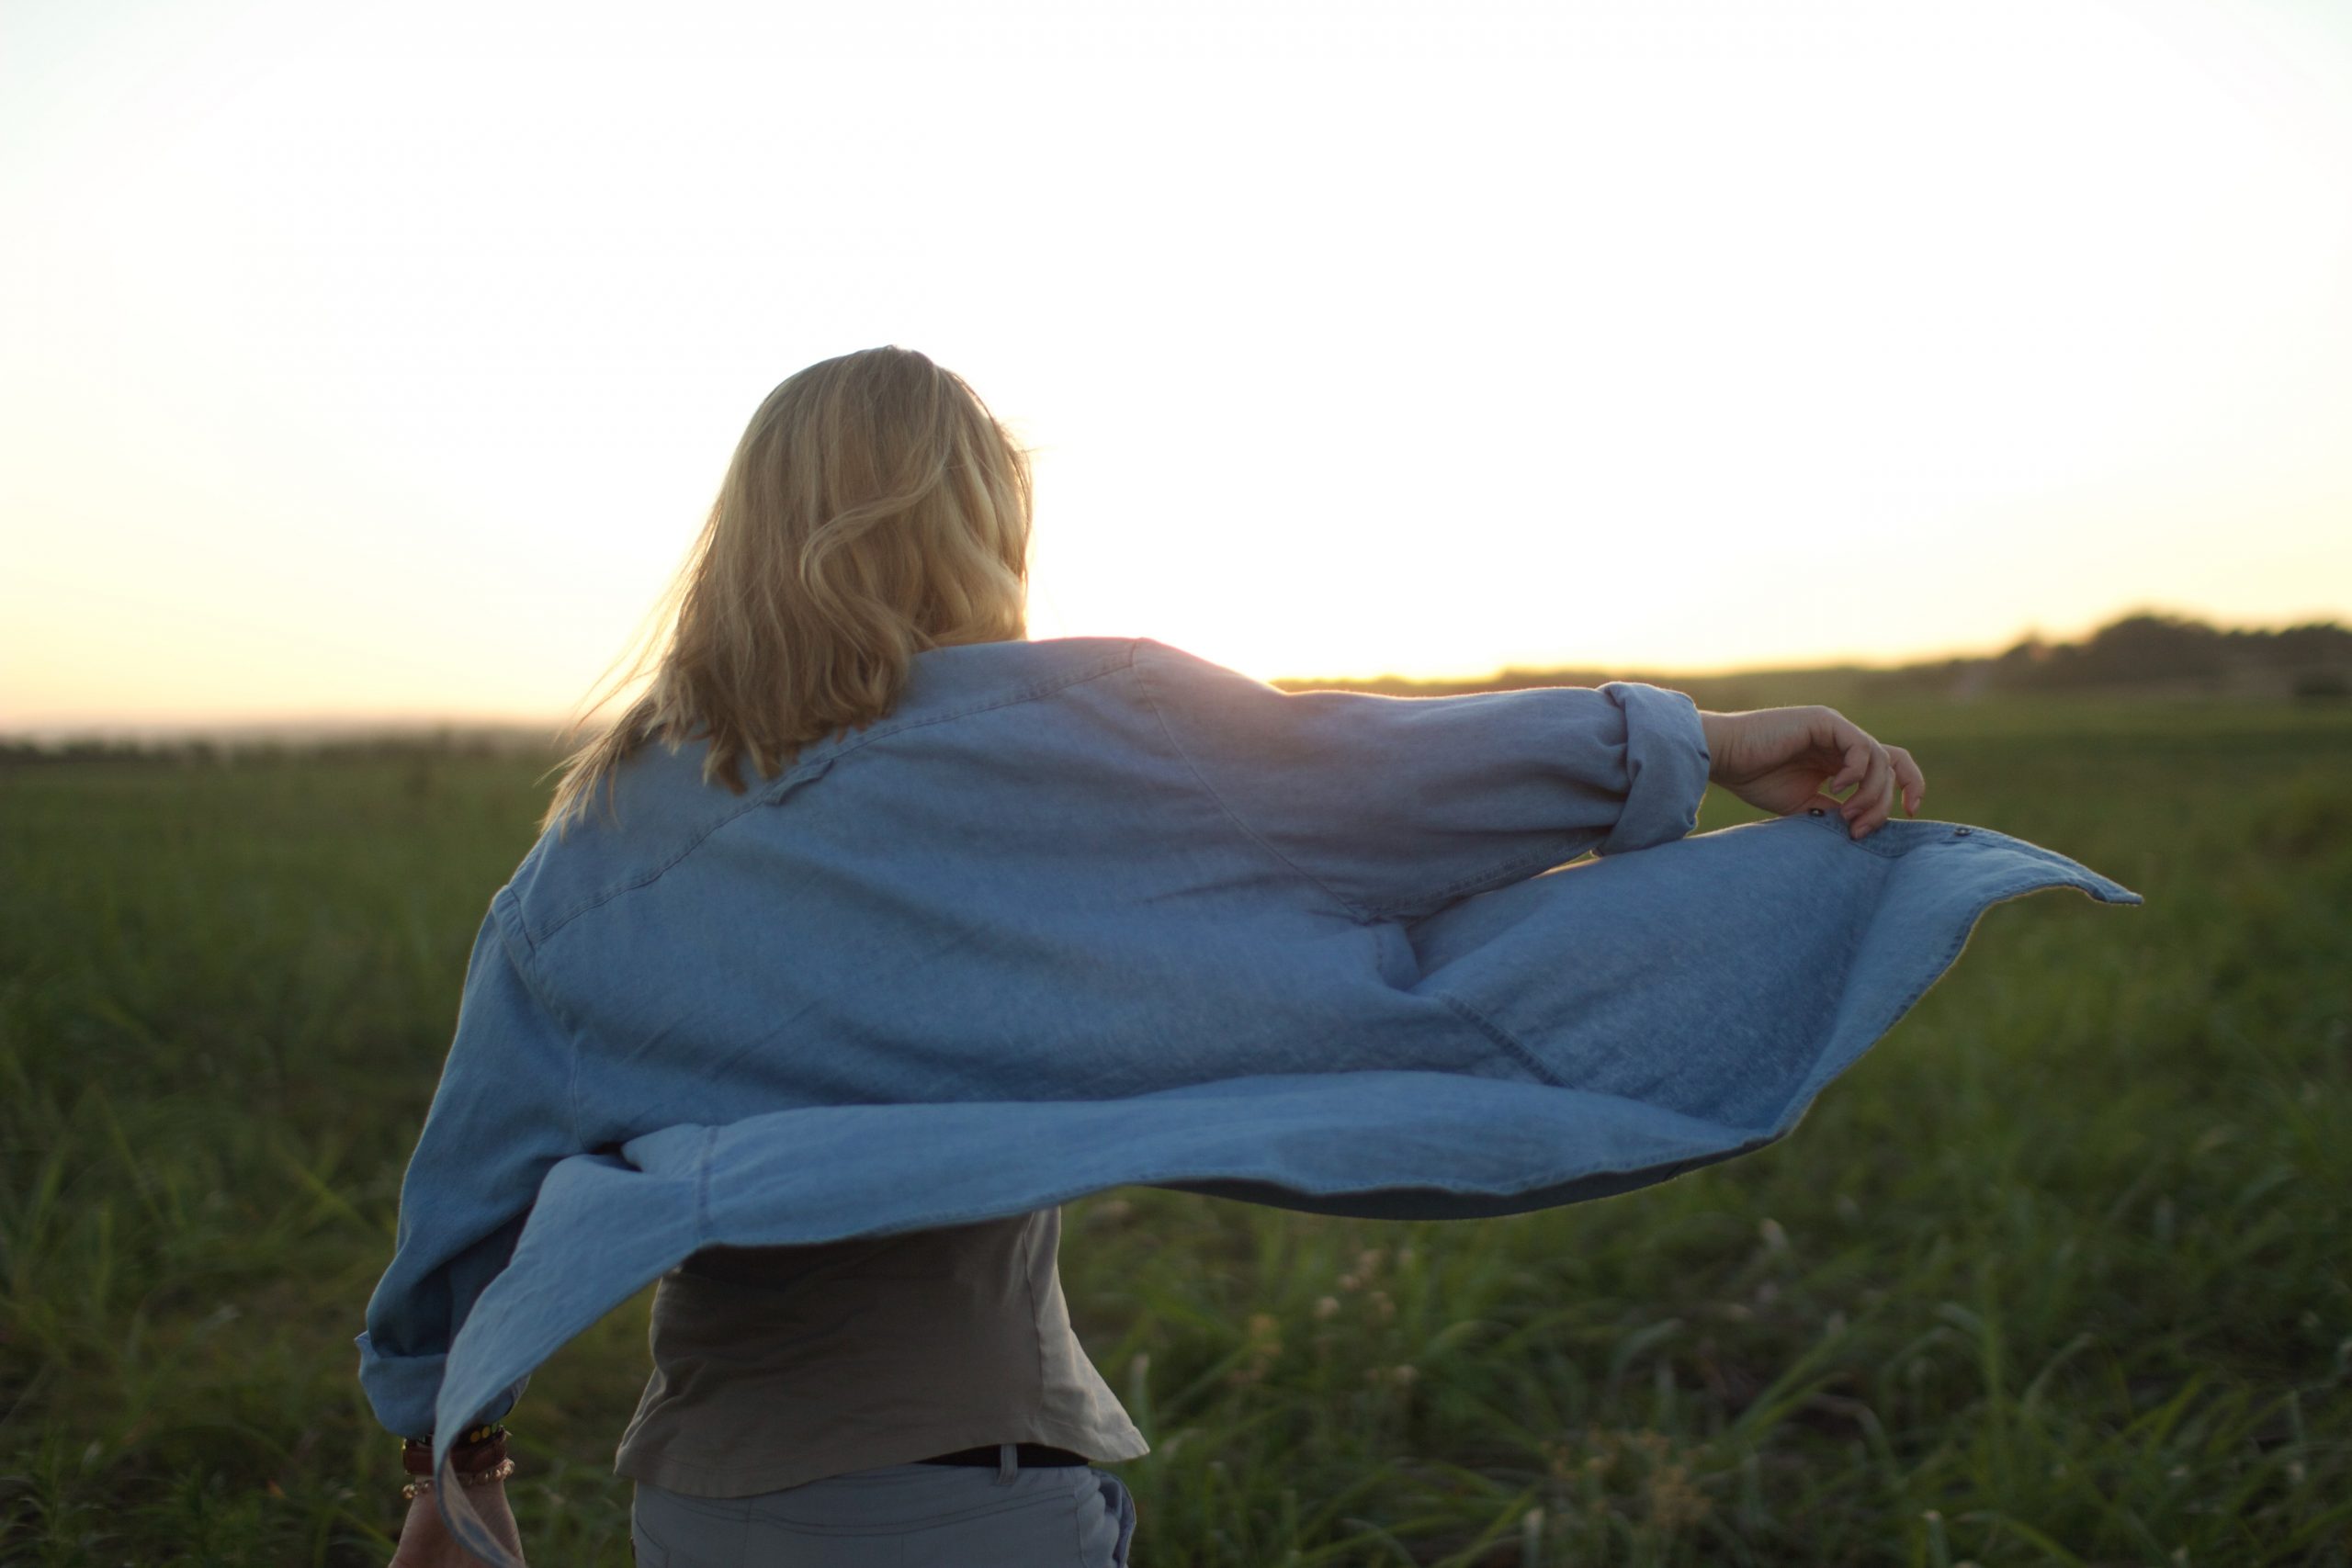 A woman stretches her arm out and holds her jacket as she looks out at the darkening sky.